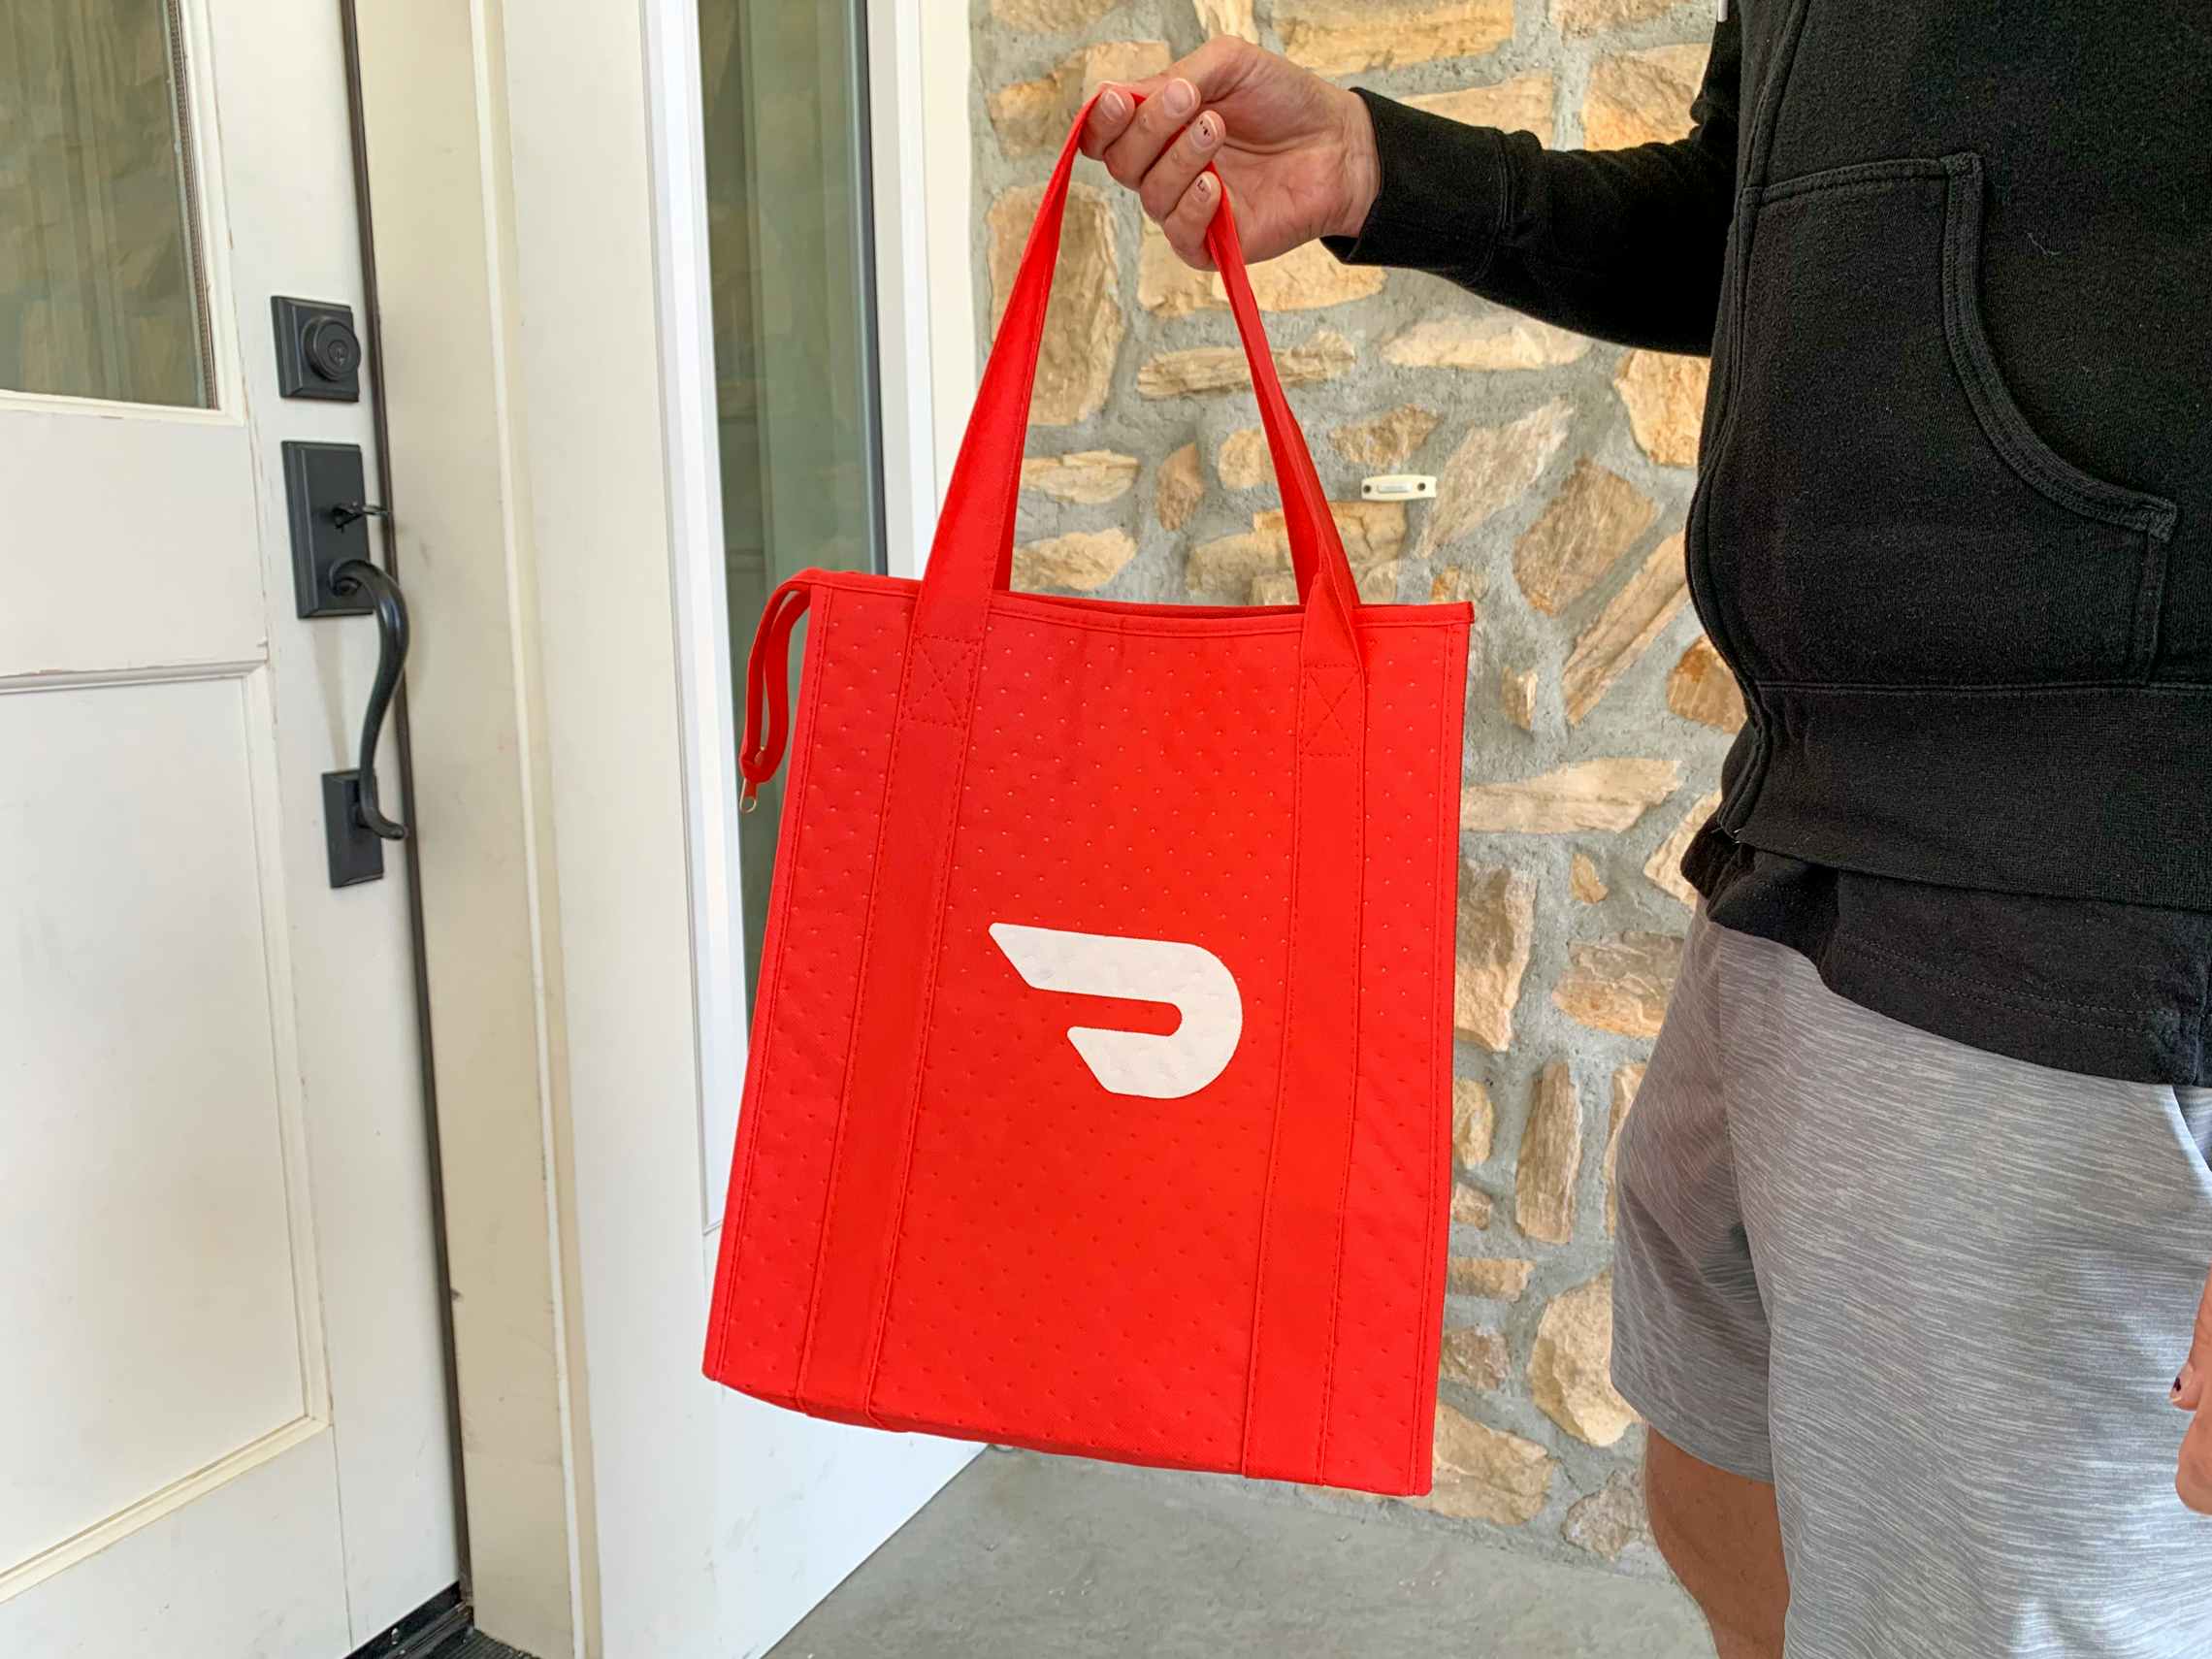 A person holding up a DoorDash meal delivery bag in front of someone's front door.